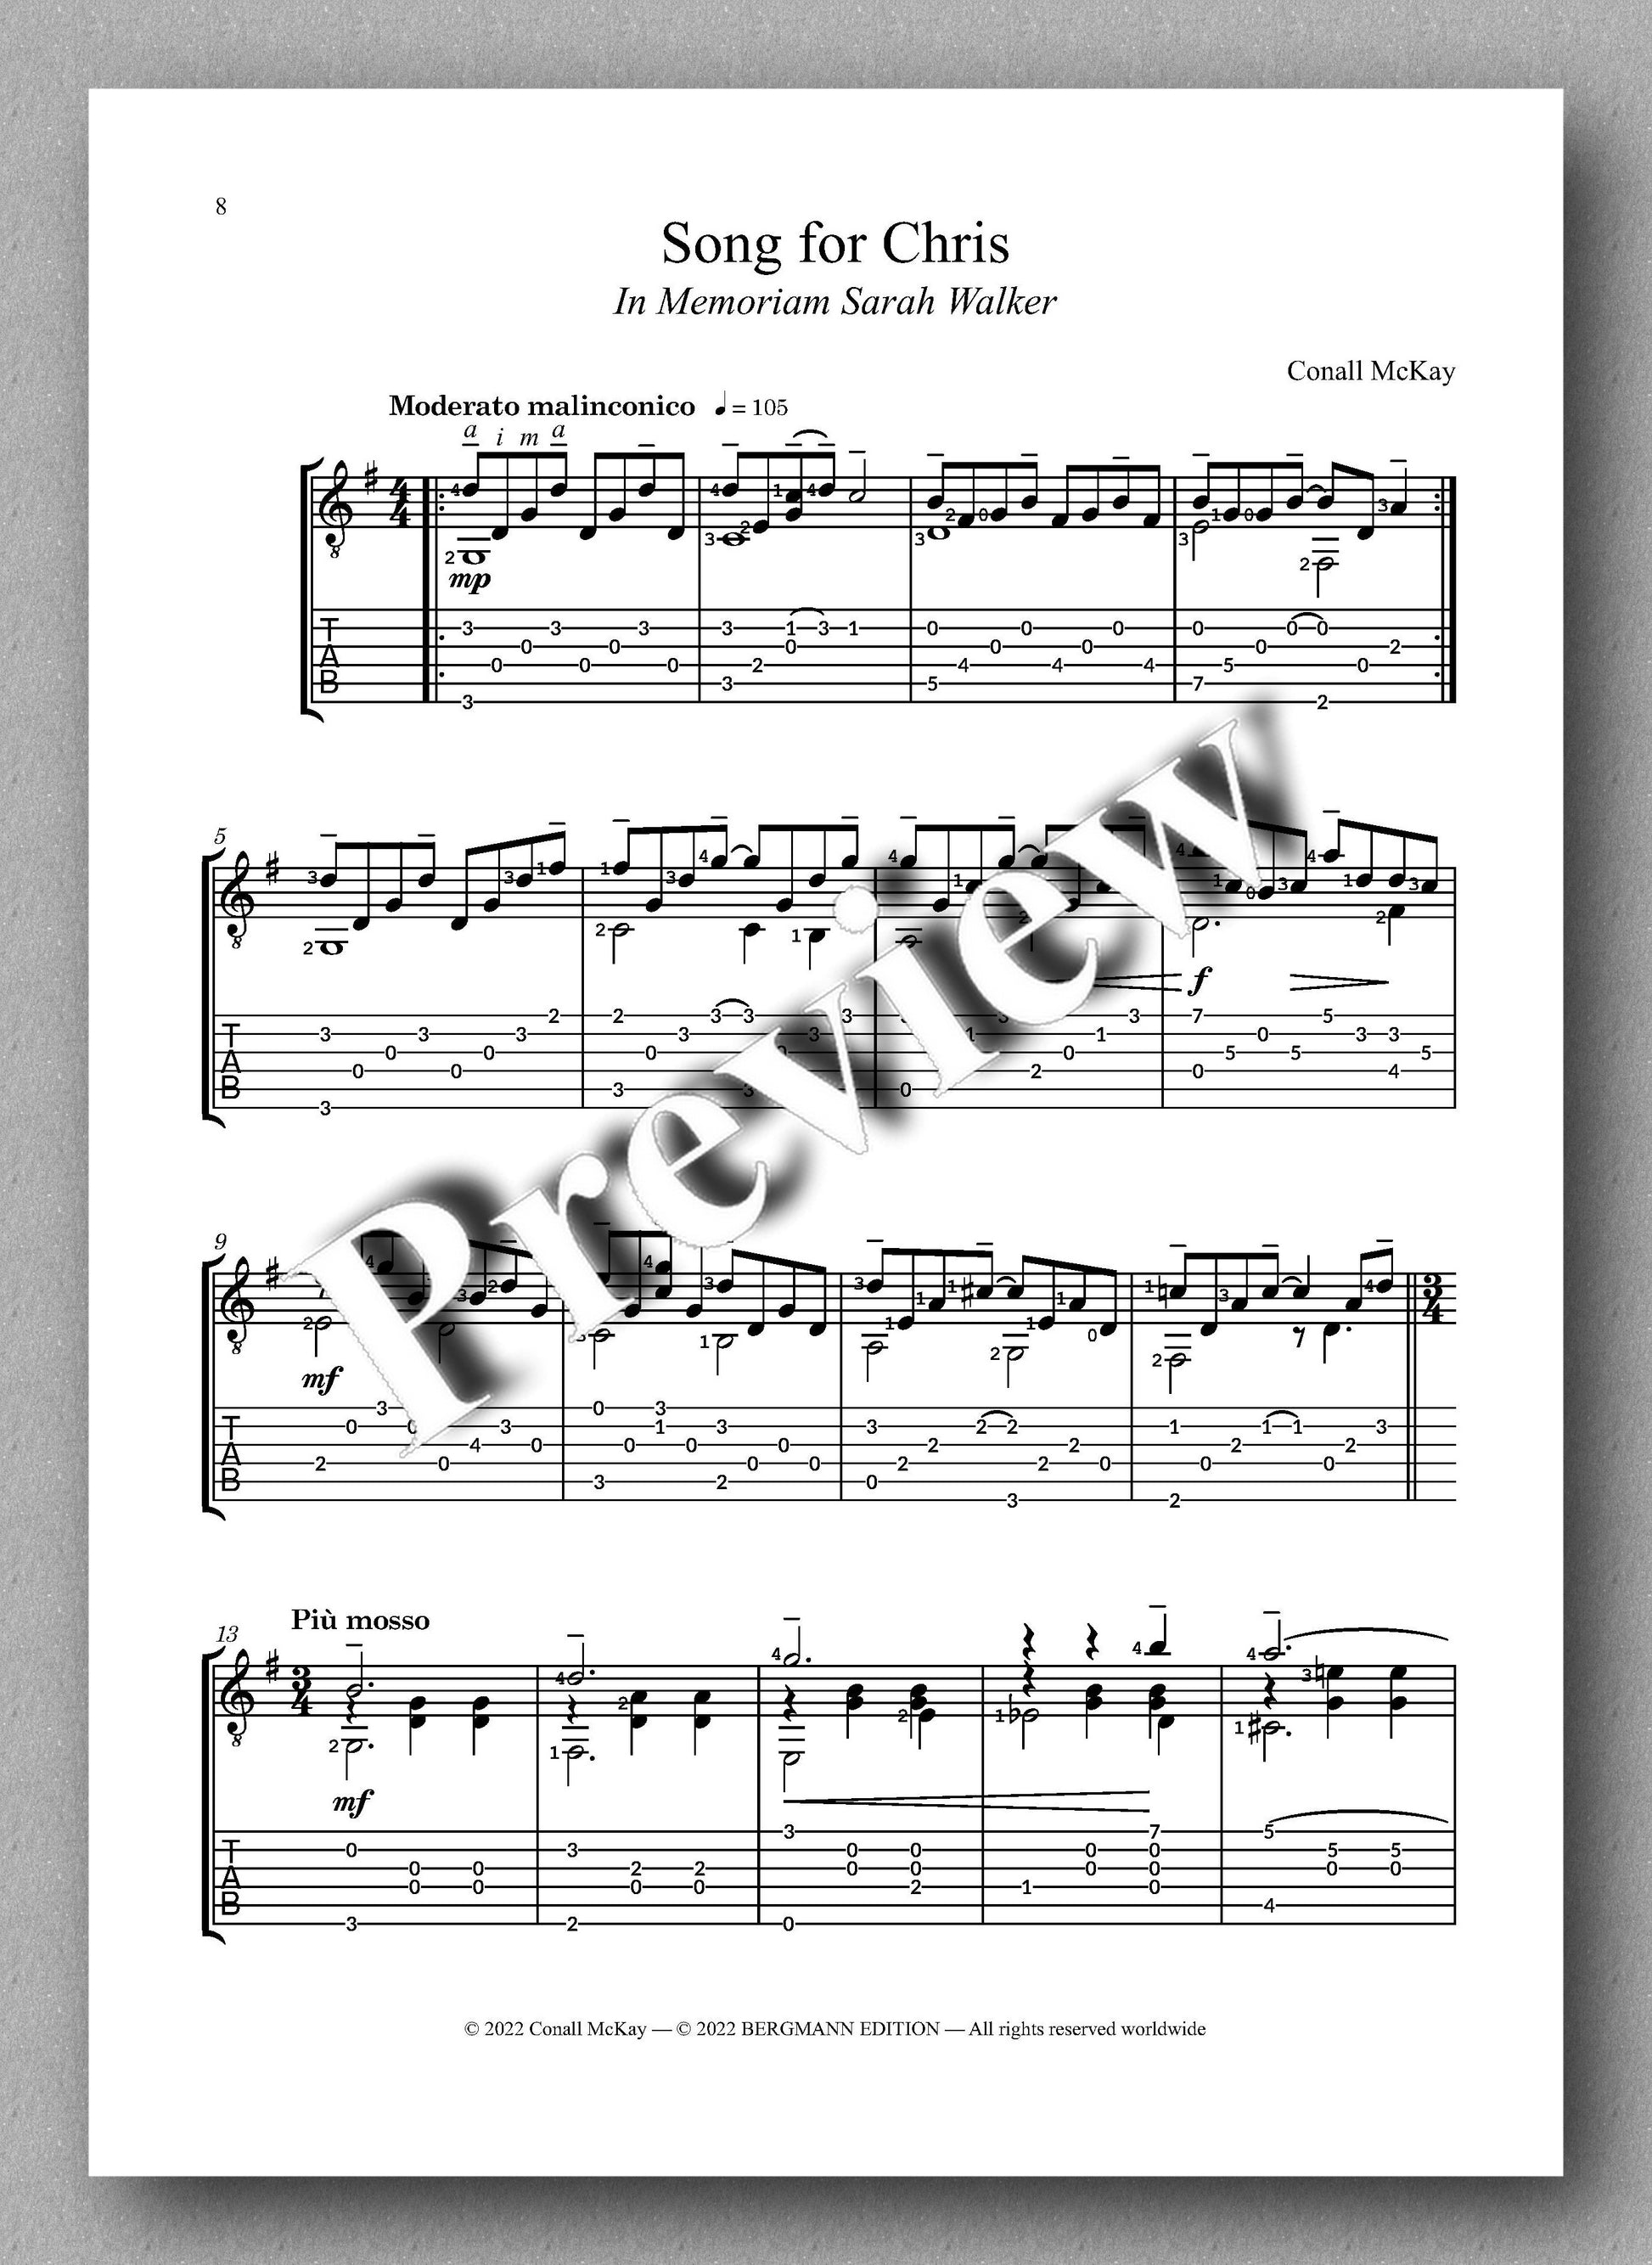 McKay, Three Songs Without Words - preview of the music score 2